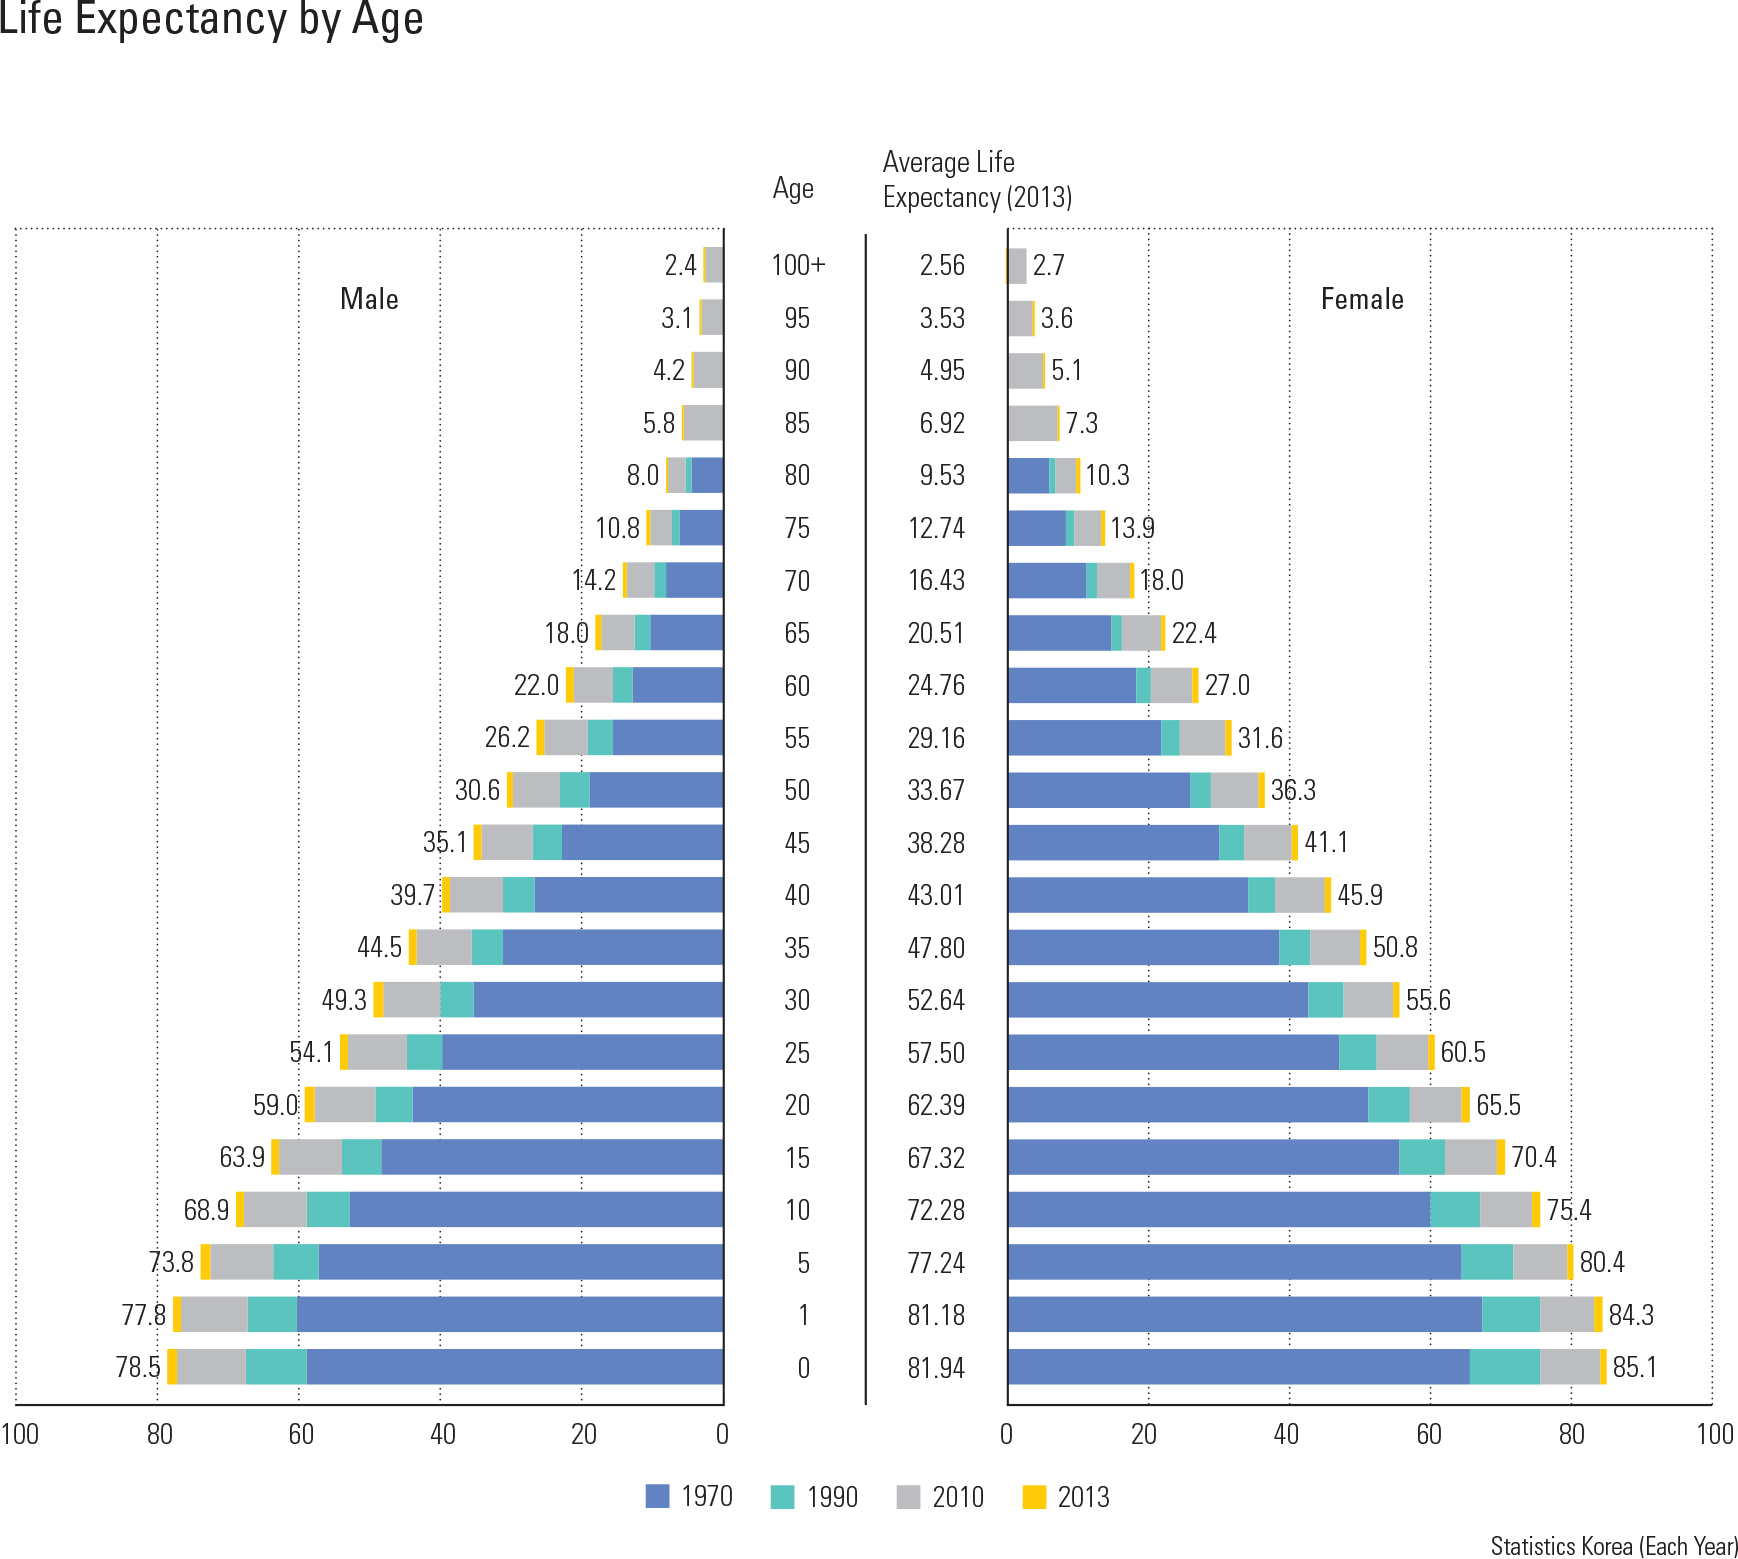 Life Expectancy by Age<p class="oz_zoom" zimg="http://imagedata.cafe24.com/us_3/us3_121-2_2.jpg"><span style="font-family:Nanum Myeongjo;"><span style="font-size:18px;"><span class="label label-danger">UPDATE DATA</span></span></p>